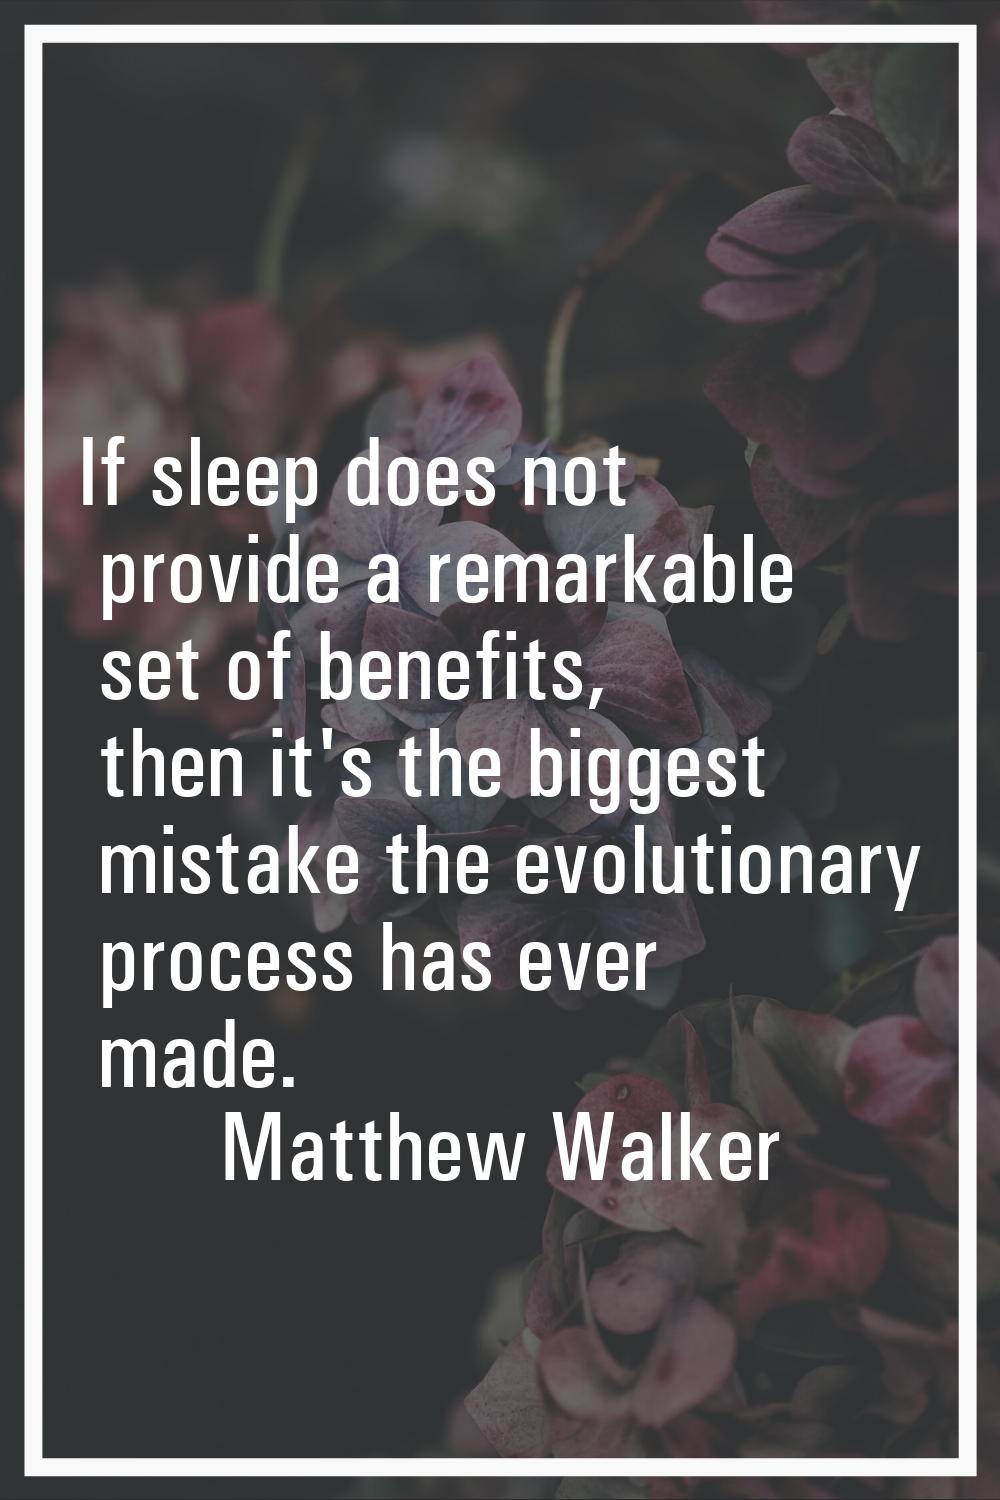 If sleep does not provide a remarkable set of benefits, then it's the biggest mistake the evolution